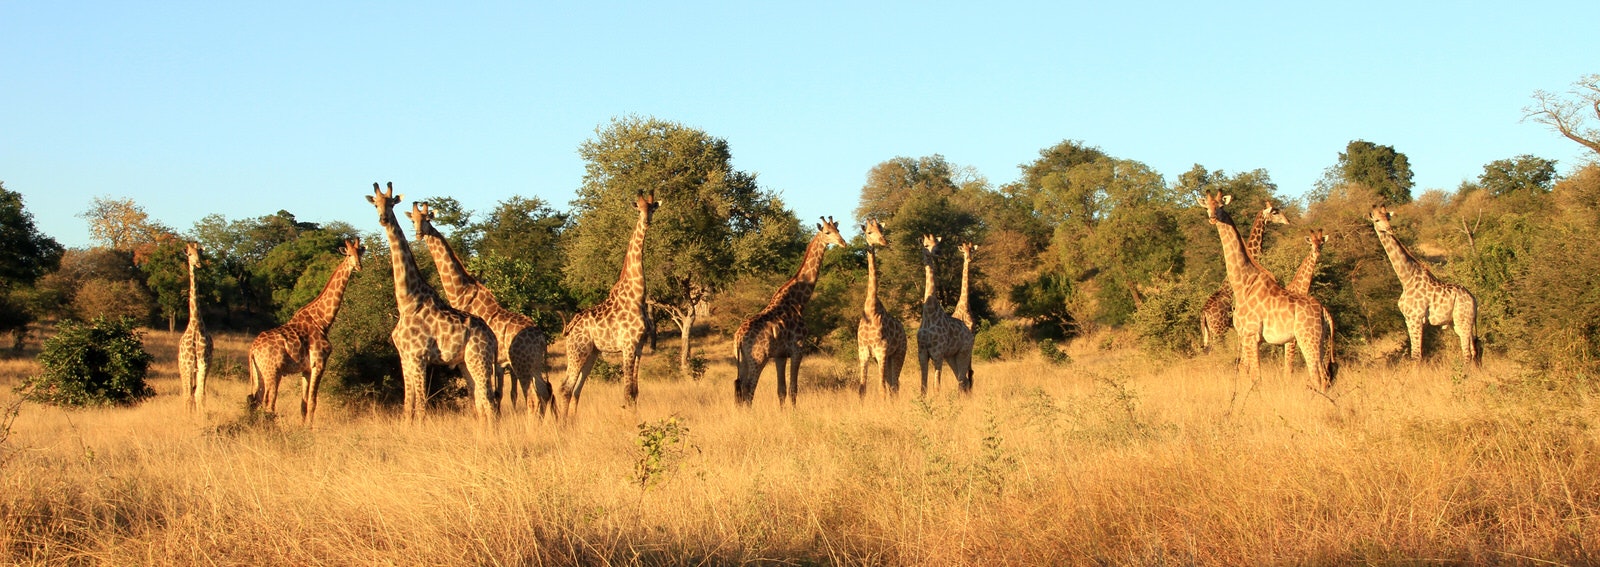 A group of 13 giraffe standing side-by-side in long grasses and backed by acacia trees; the light is golden with a blue sky above.